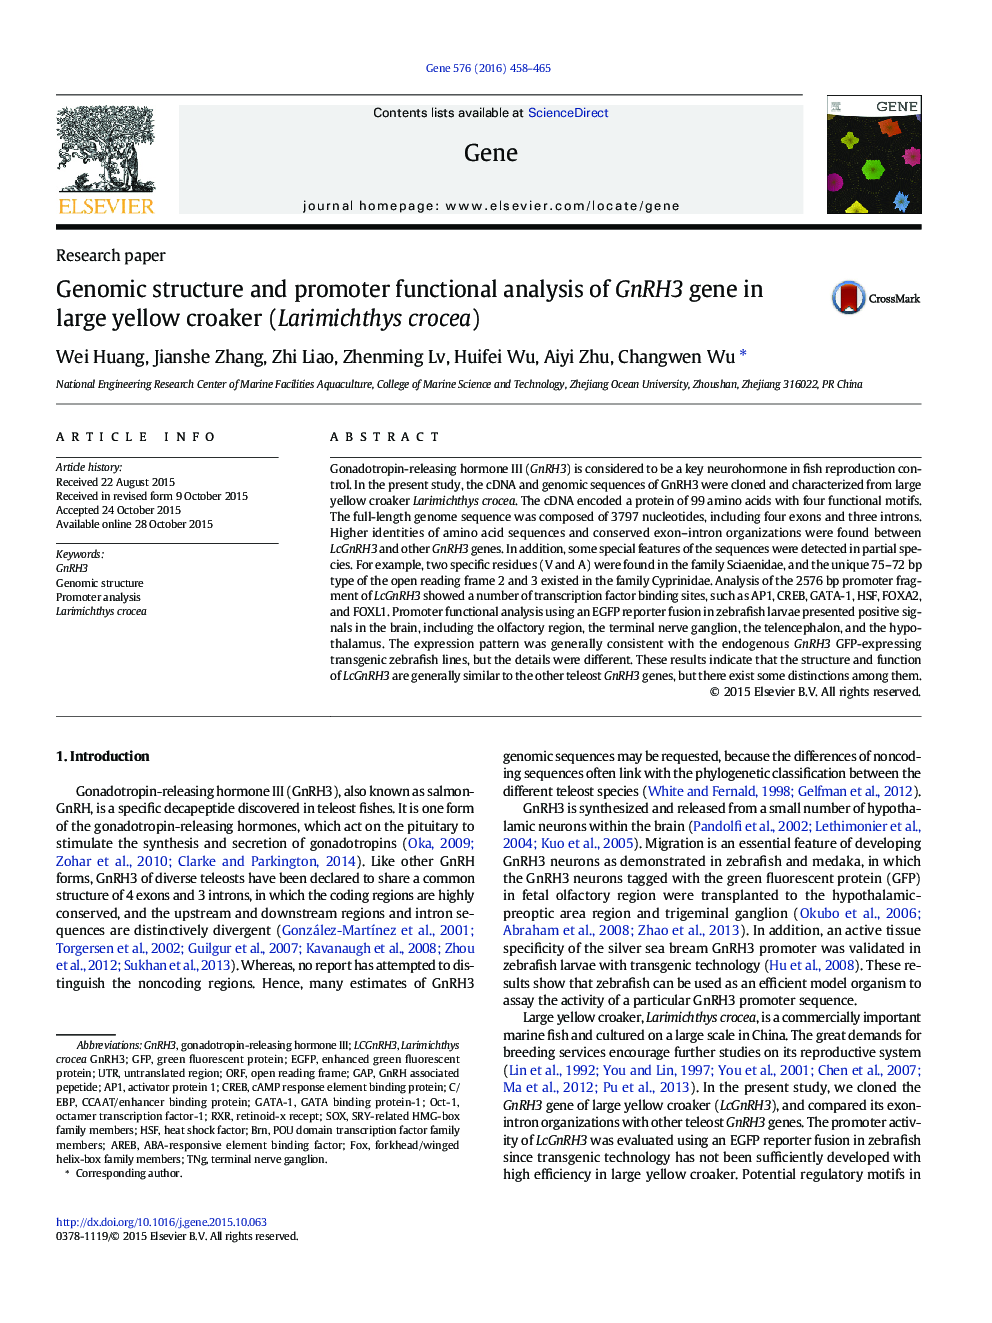 Research paperGenomic structure and promoter functional analysis of GnRH3 gene in large yellow croaker (Larimichthys crocea)